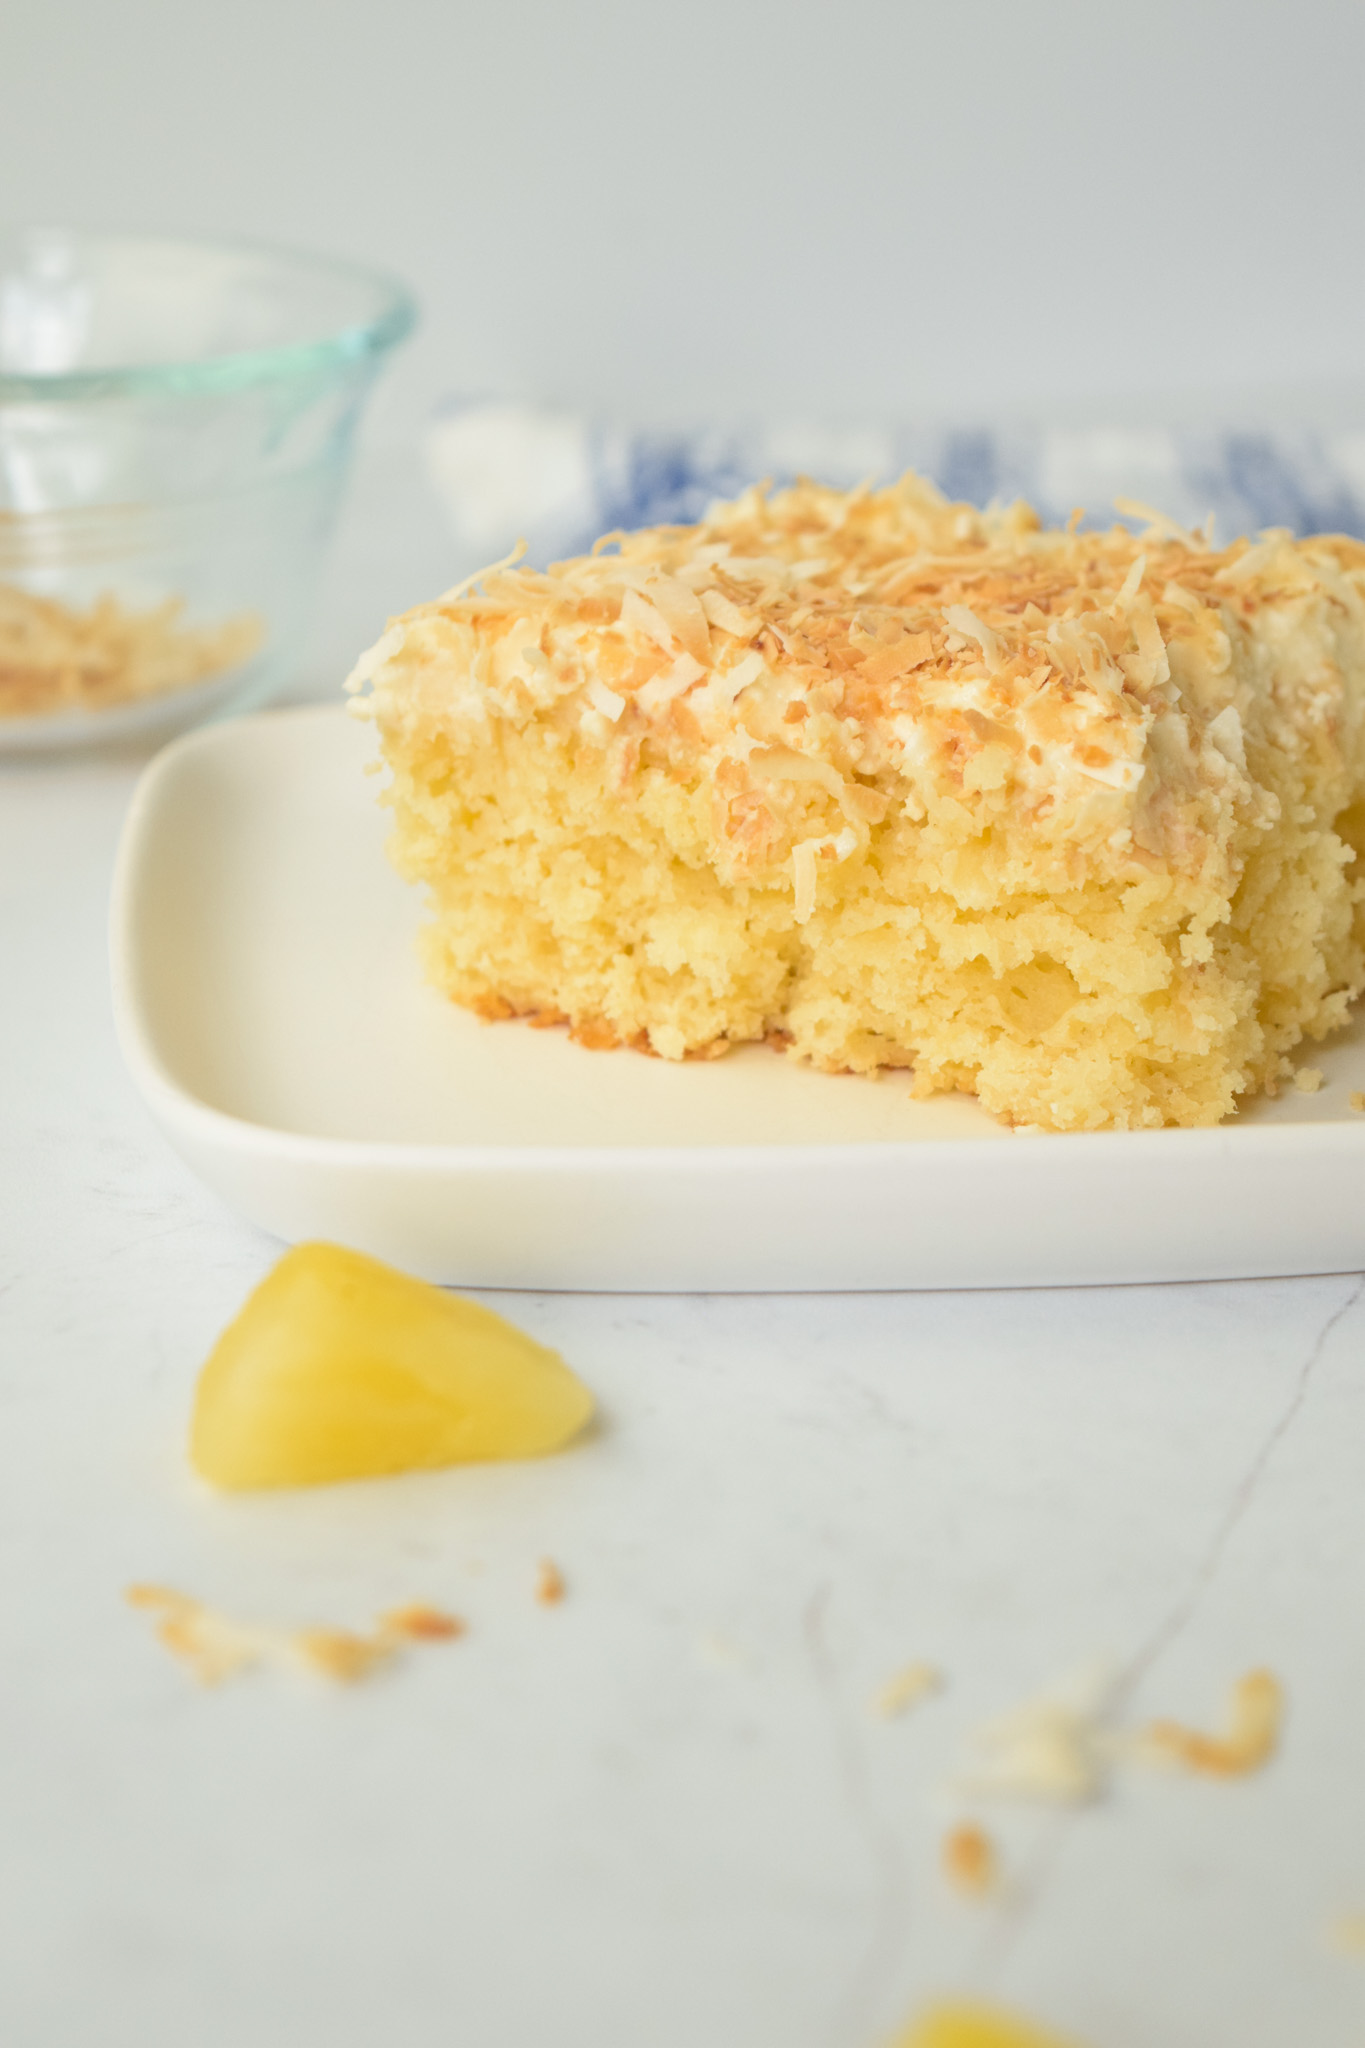 Slice of GF Pina Colada Cake with Toasted Coconut